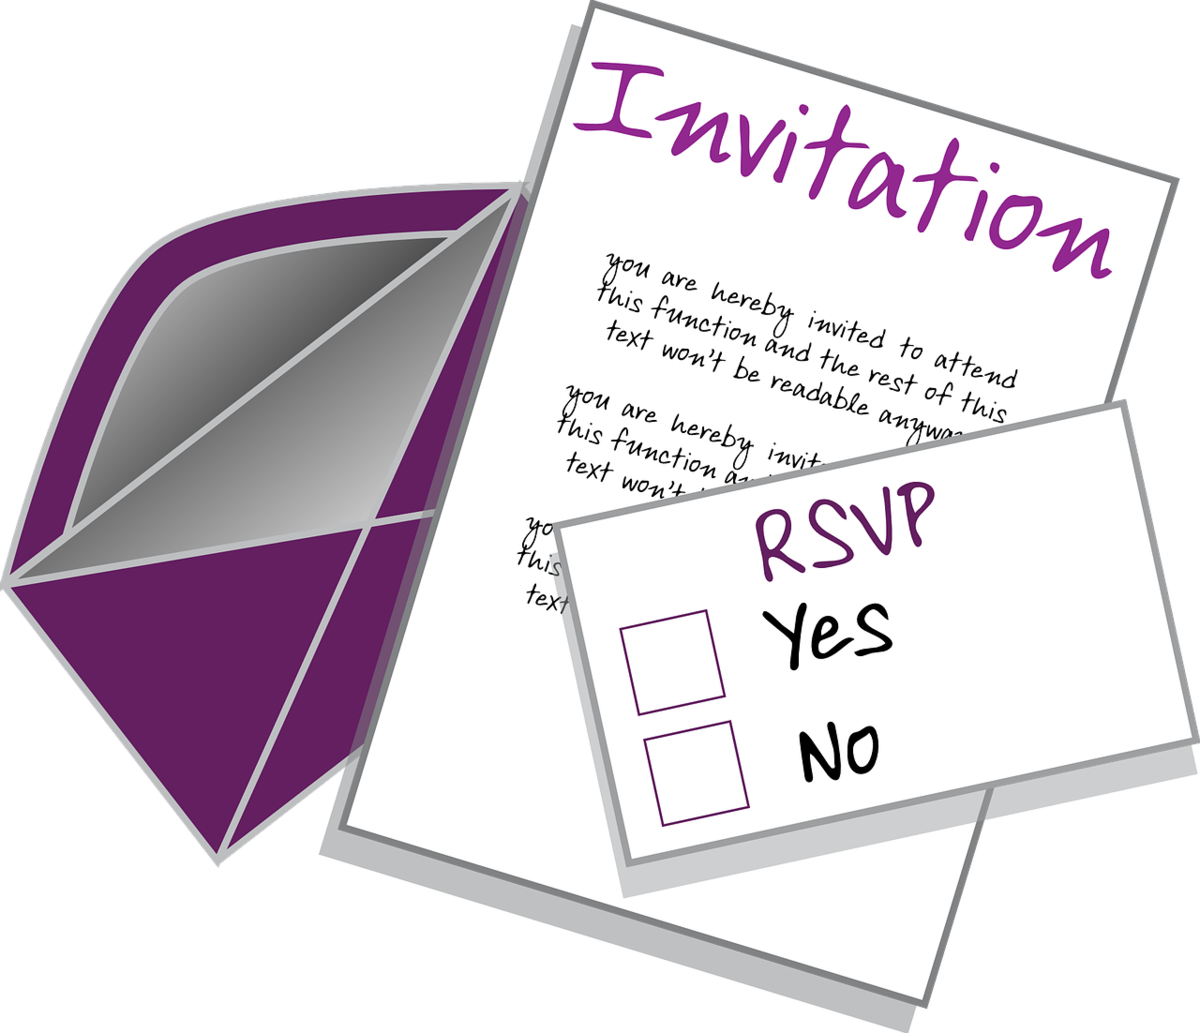 rsvp meaning on invitation